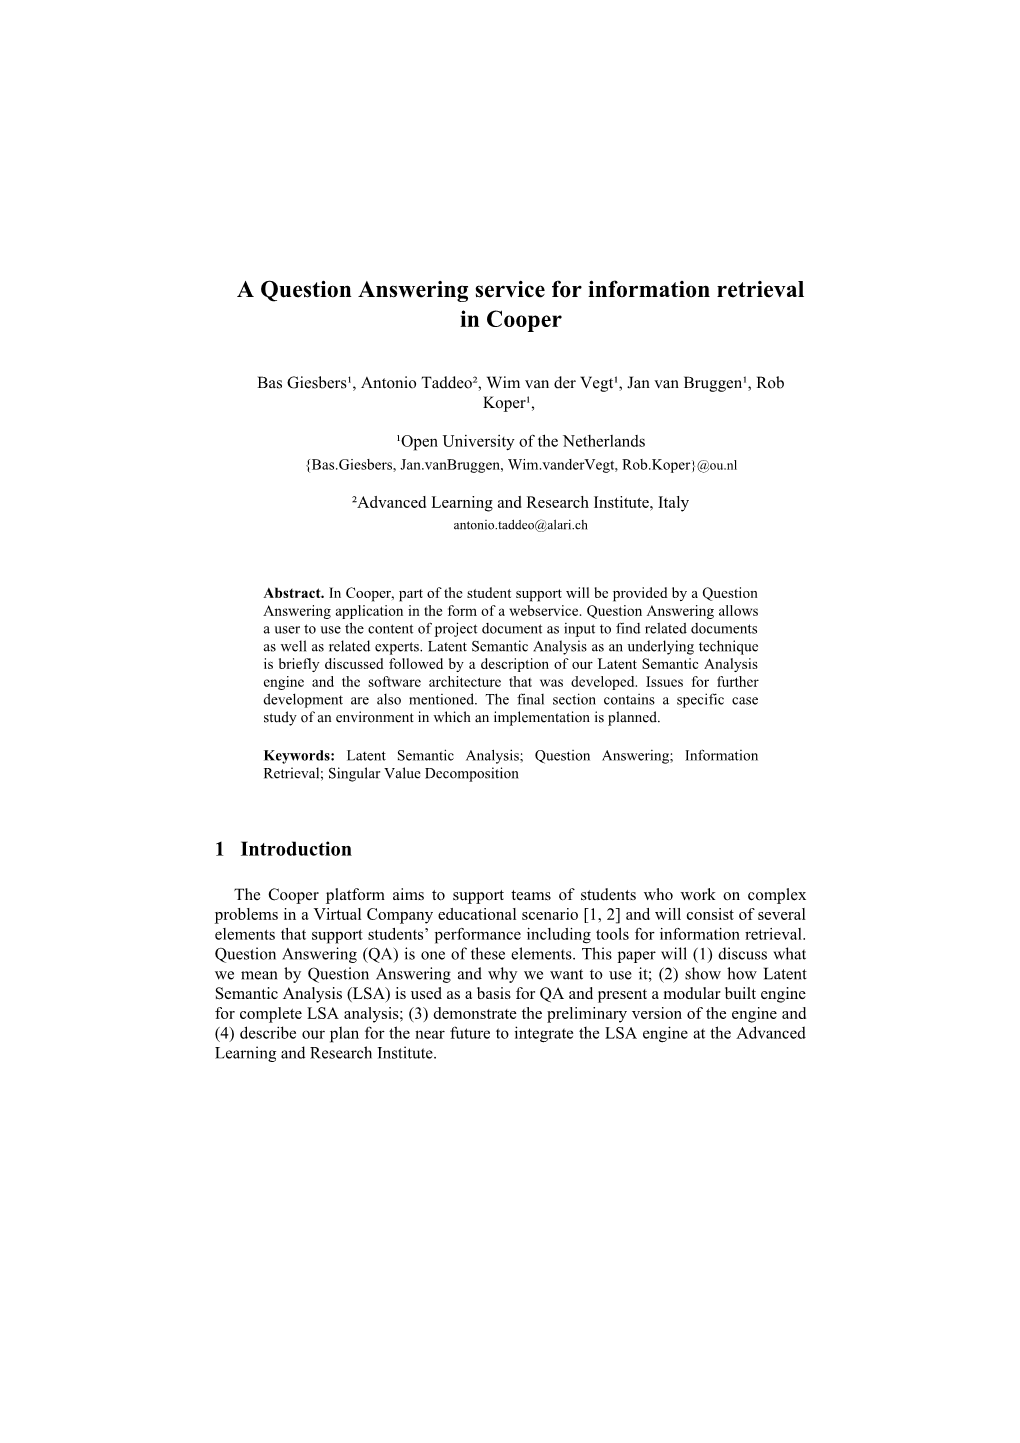 A Question Answering Service for Information Retrieval in Cooper